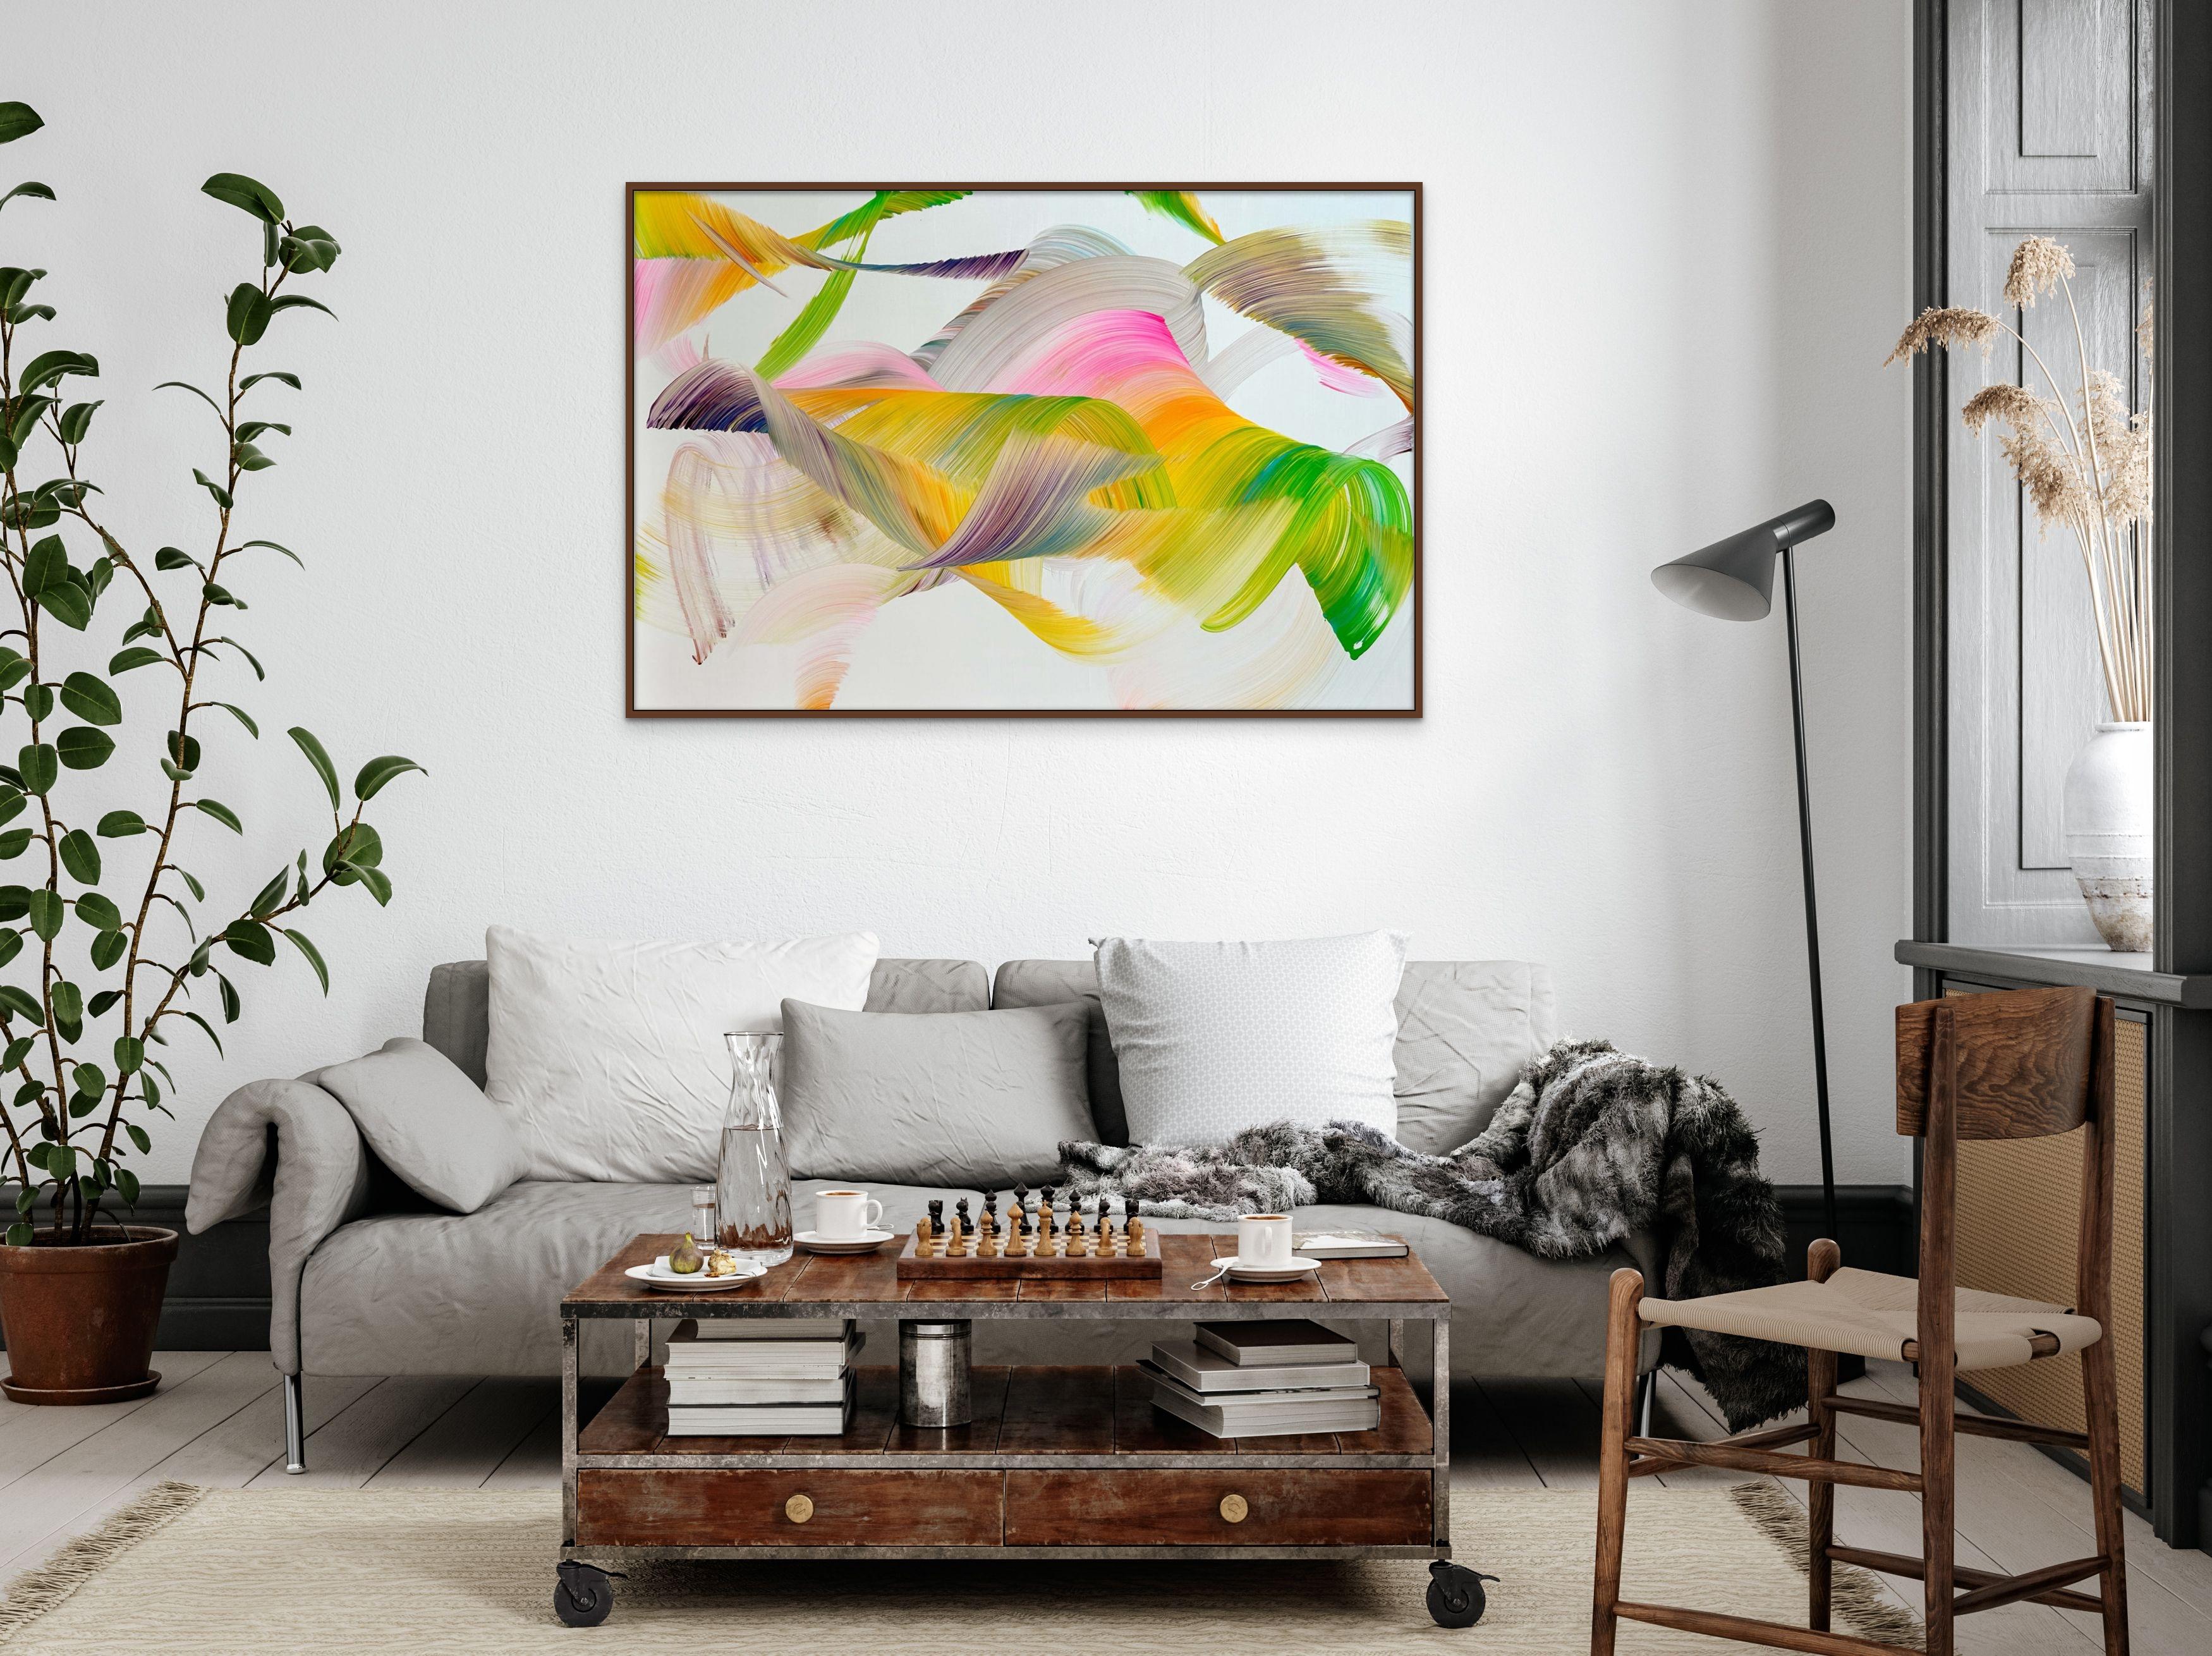 Sweet dreams (Abstract painting) - Painting by Nikolaos Schizas